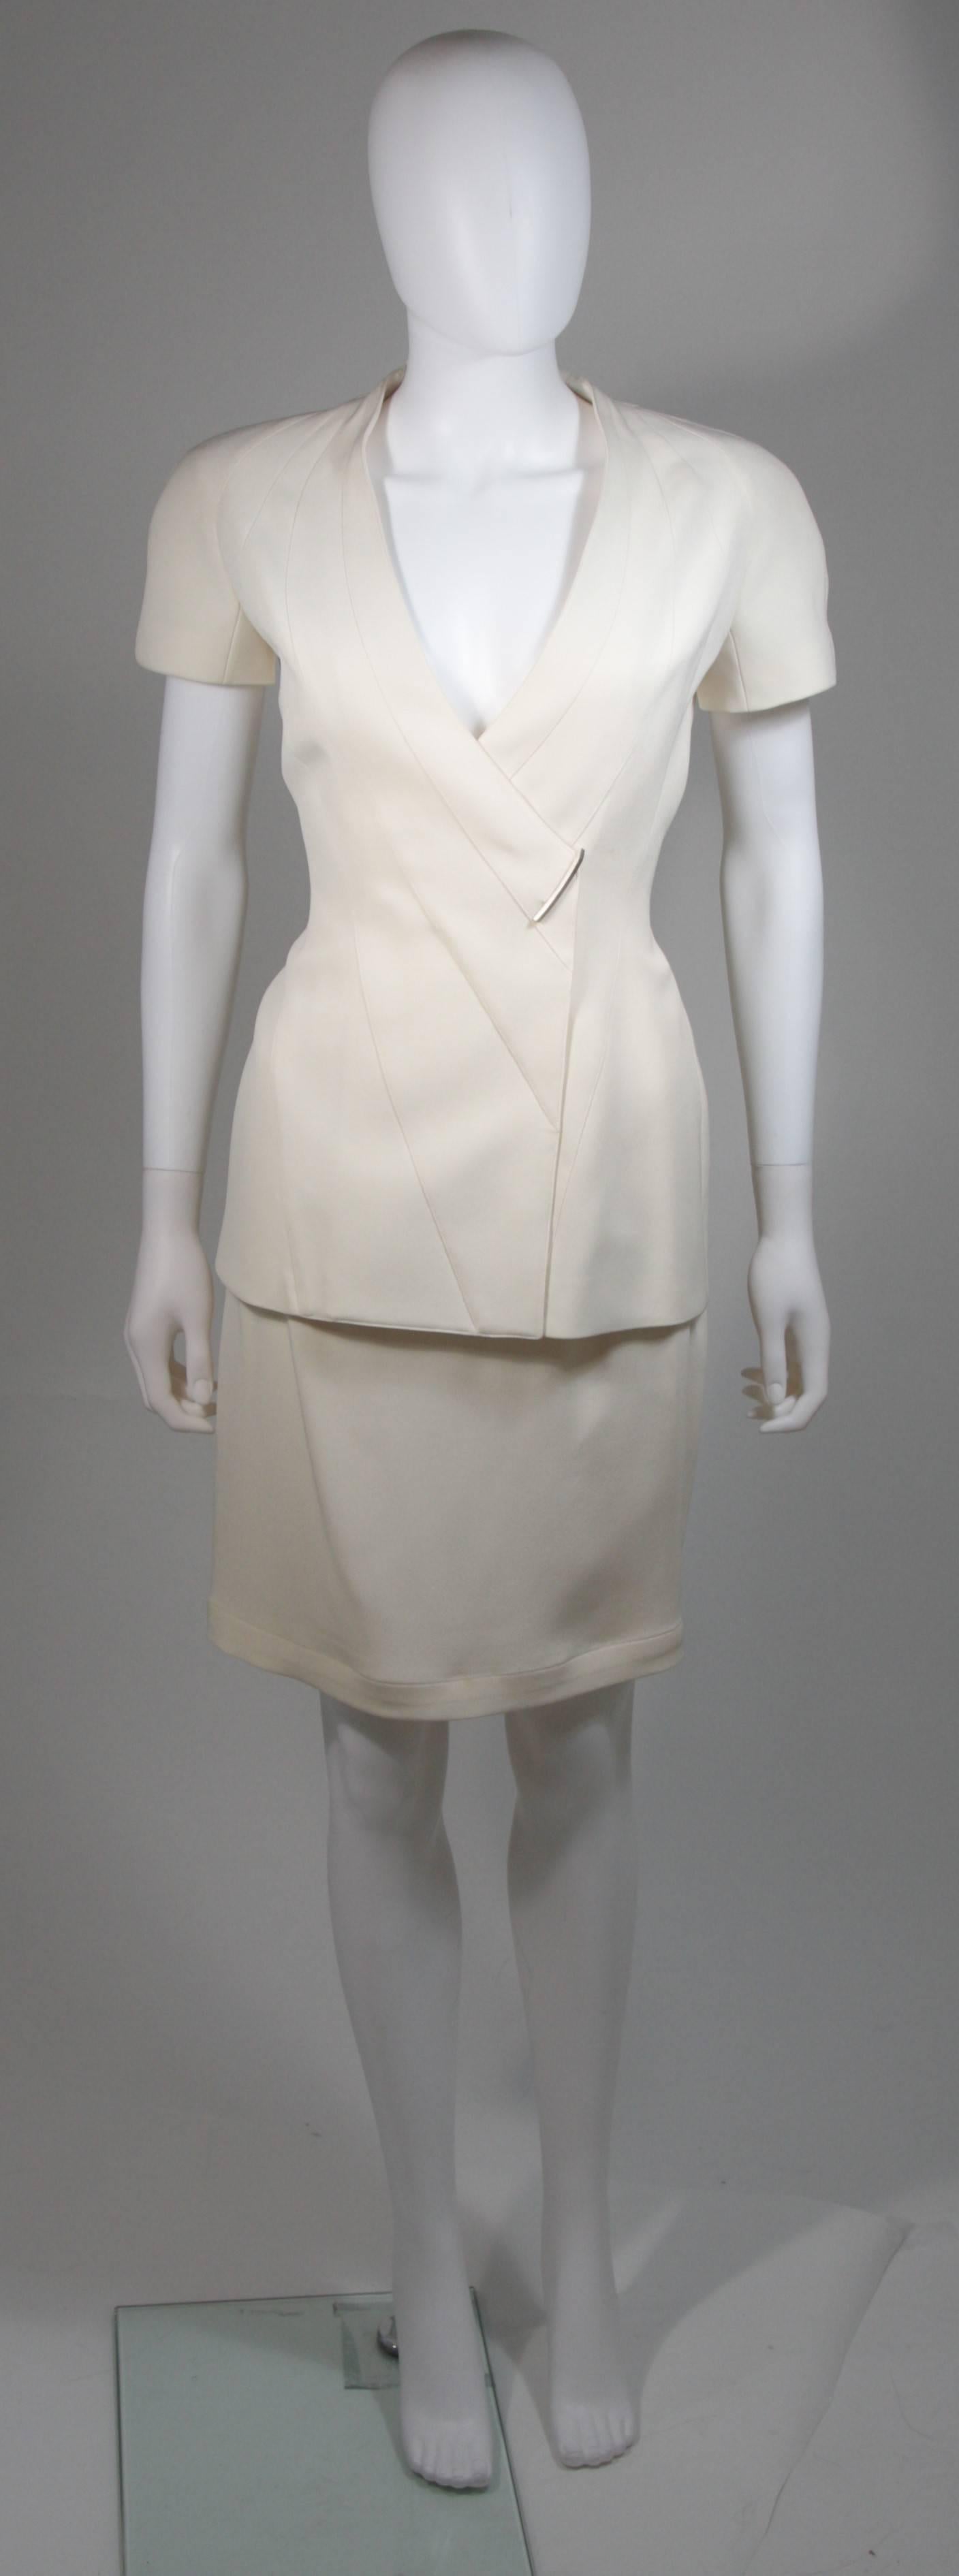 This skirt suit is composed of a white material. The jacket has a center front closures with silver hardware. The skirt has a classic pencil silhouette with zipper closure. In excellent vintage condition. Made in France. 

  **Please cross-reference